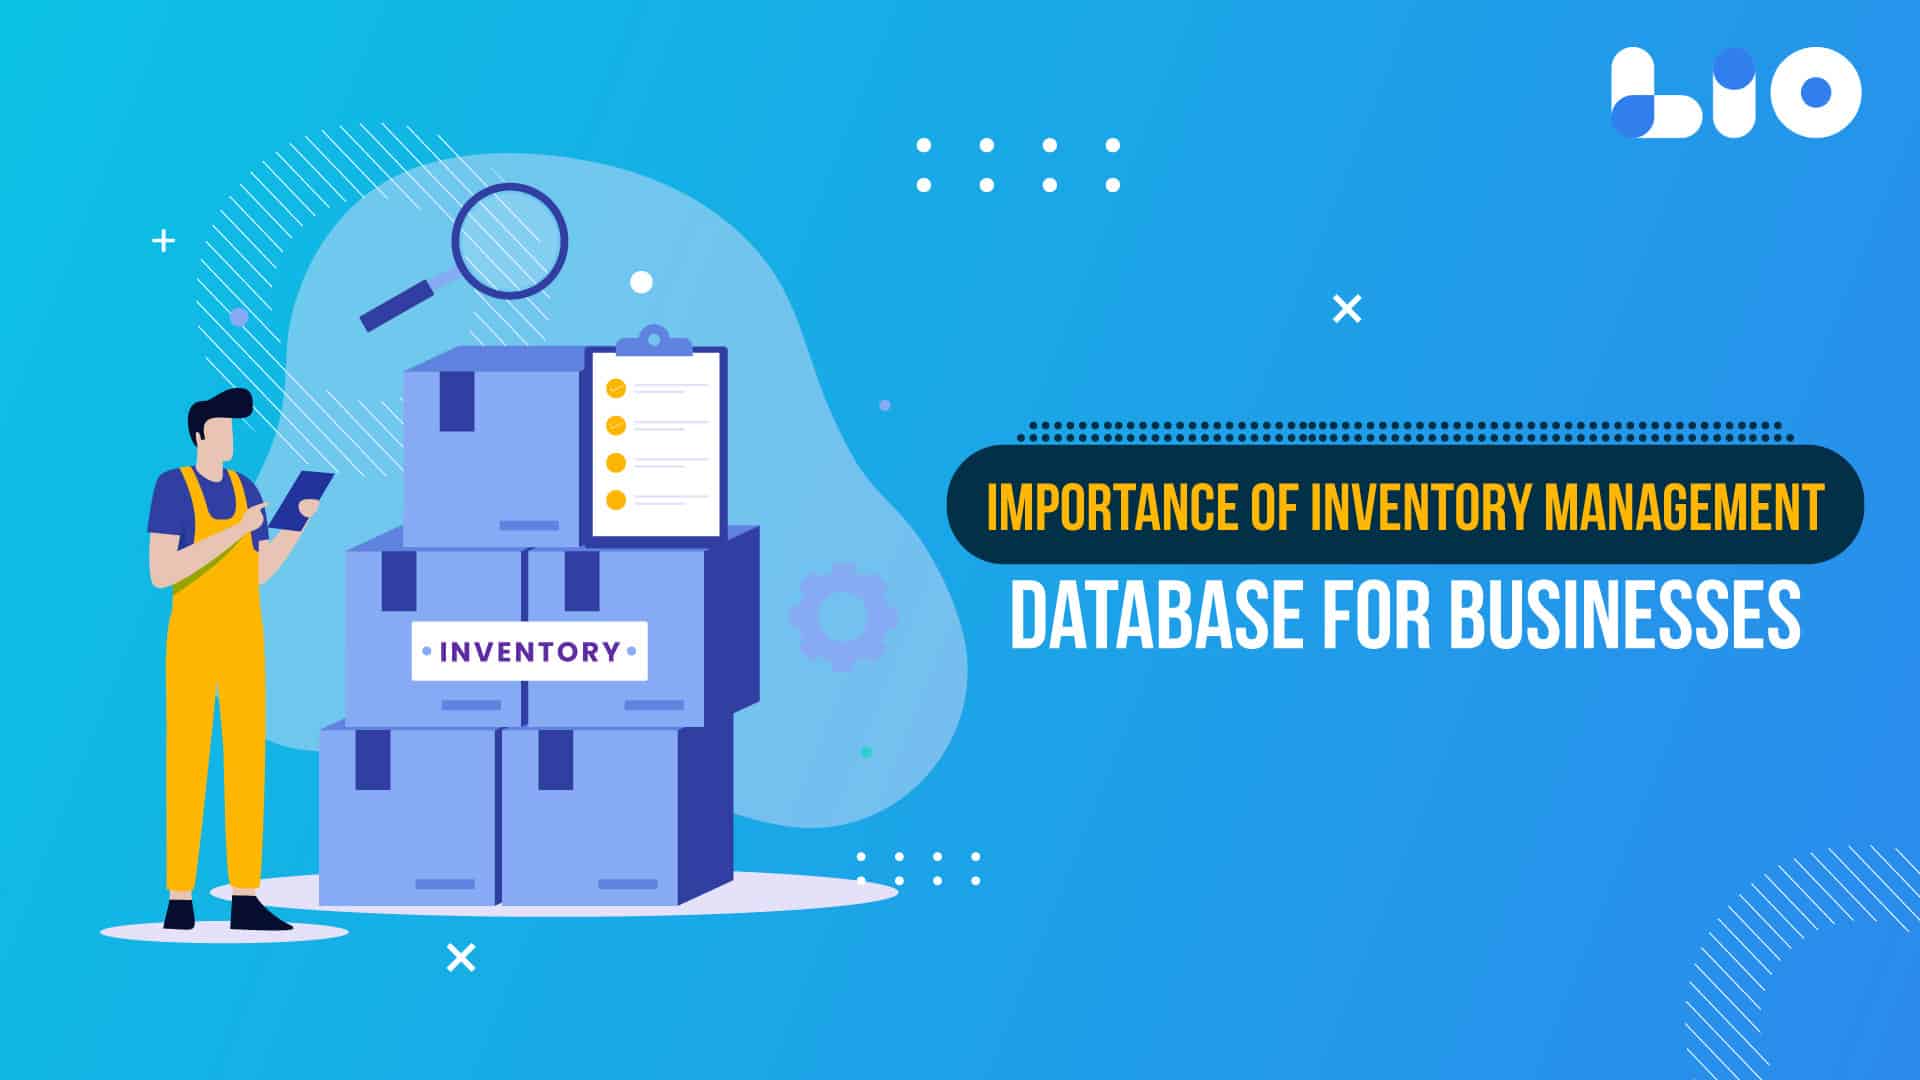 Understanding the Importance of Inventory Management Database for Businesses